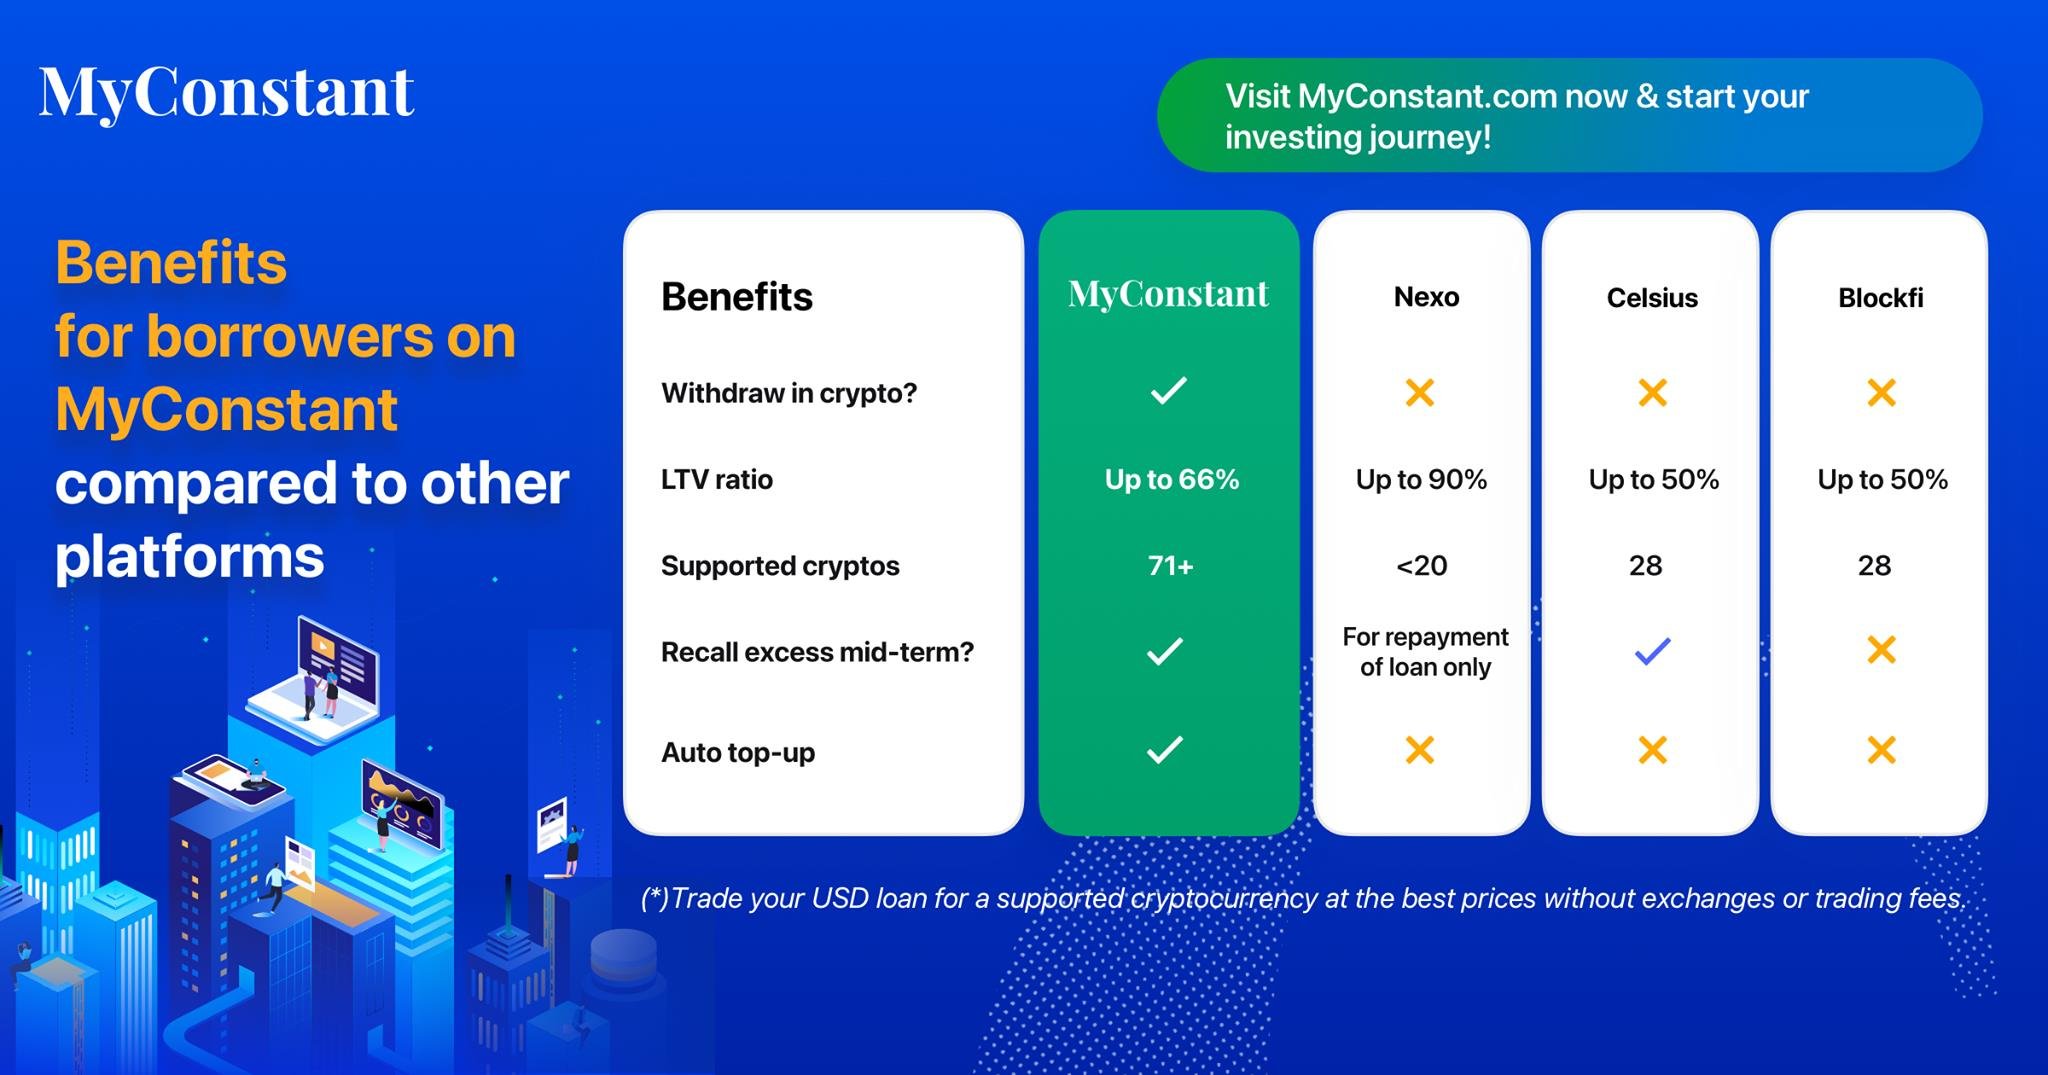 Benefits for borrowers on MyConstant compared to other platforms (Nexo, Celsius, BlockFi)